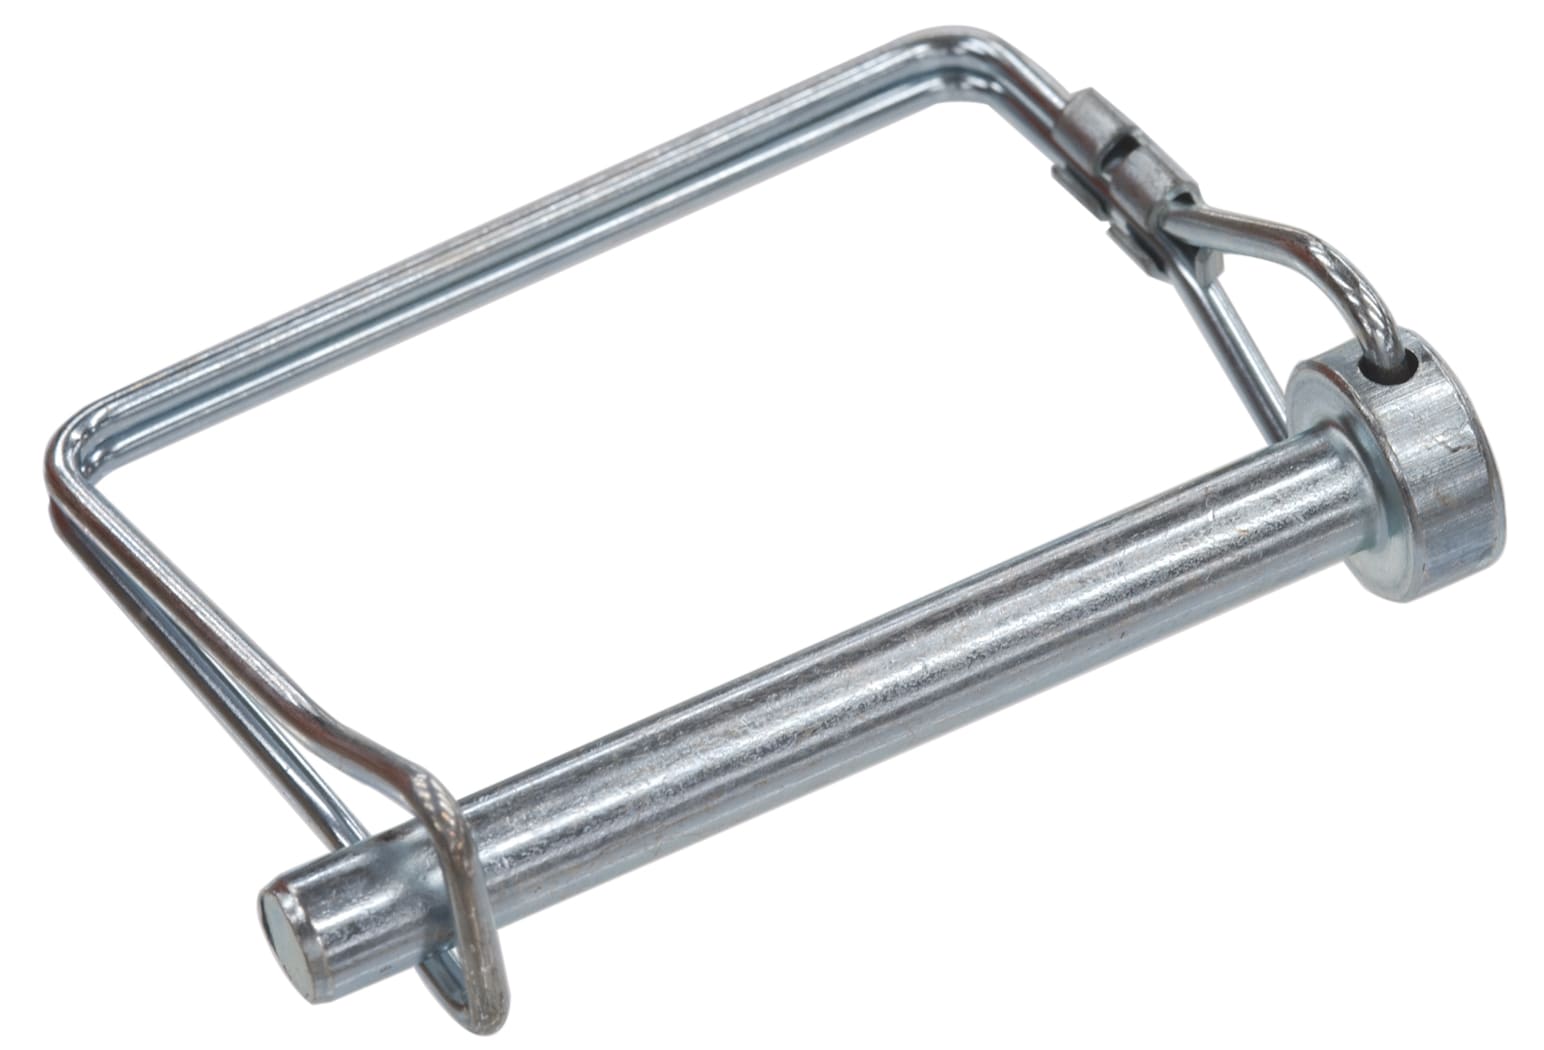 Ball Lock Clevis Pins: Secure Fastening Solutions